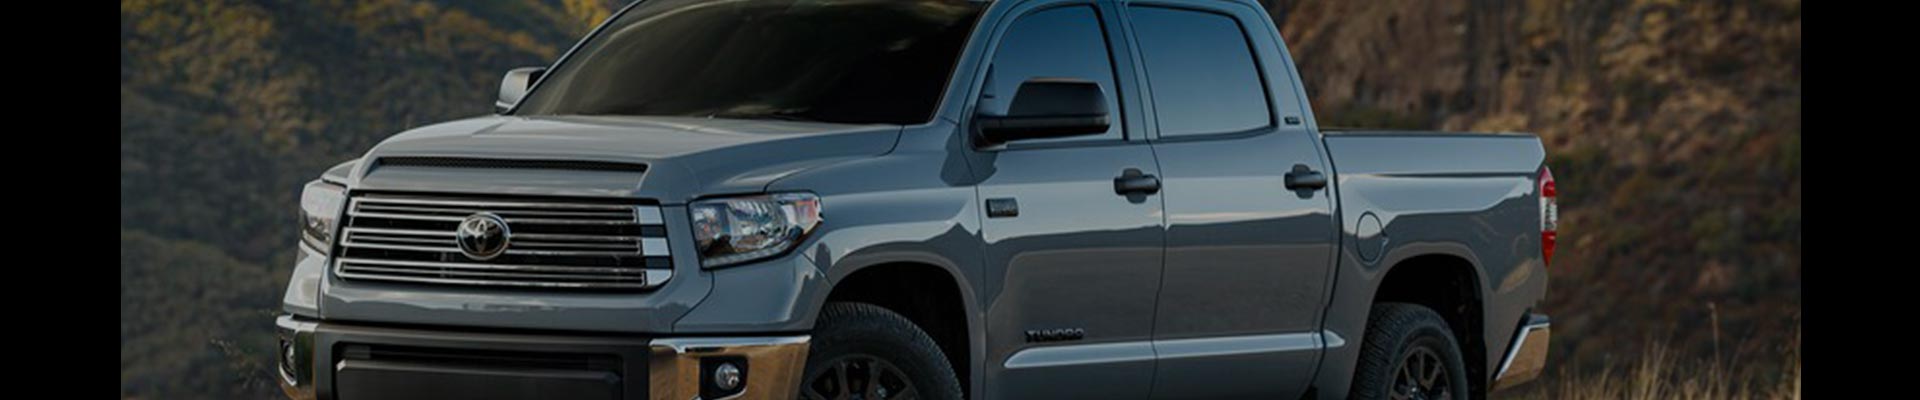 Shop Replacement and OEM 2018 Toyota Tundra Parts with Discounted Price on the Net